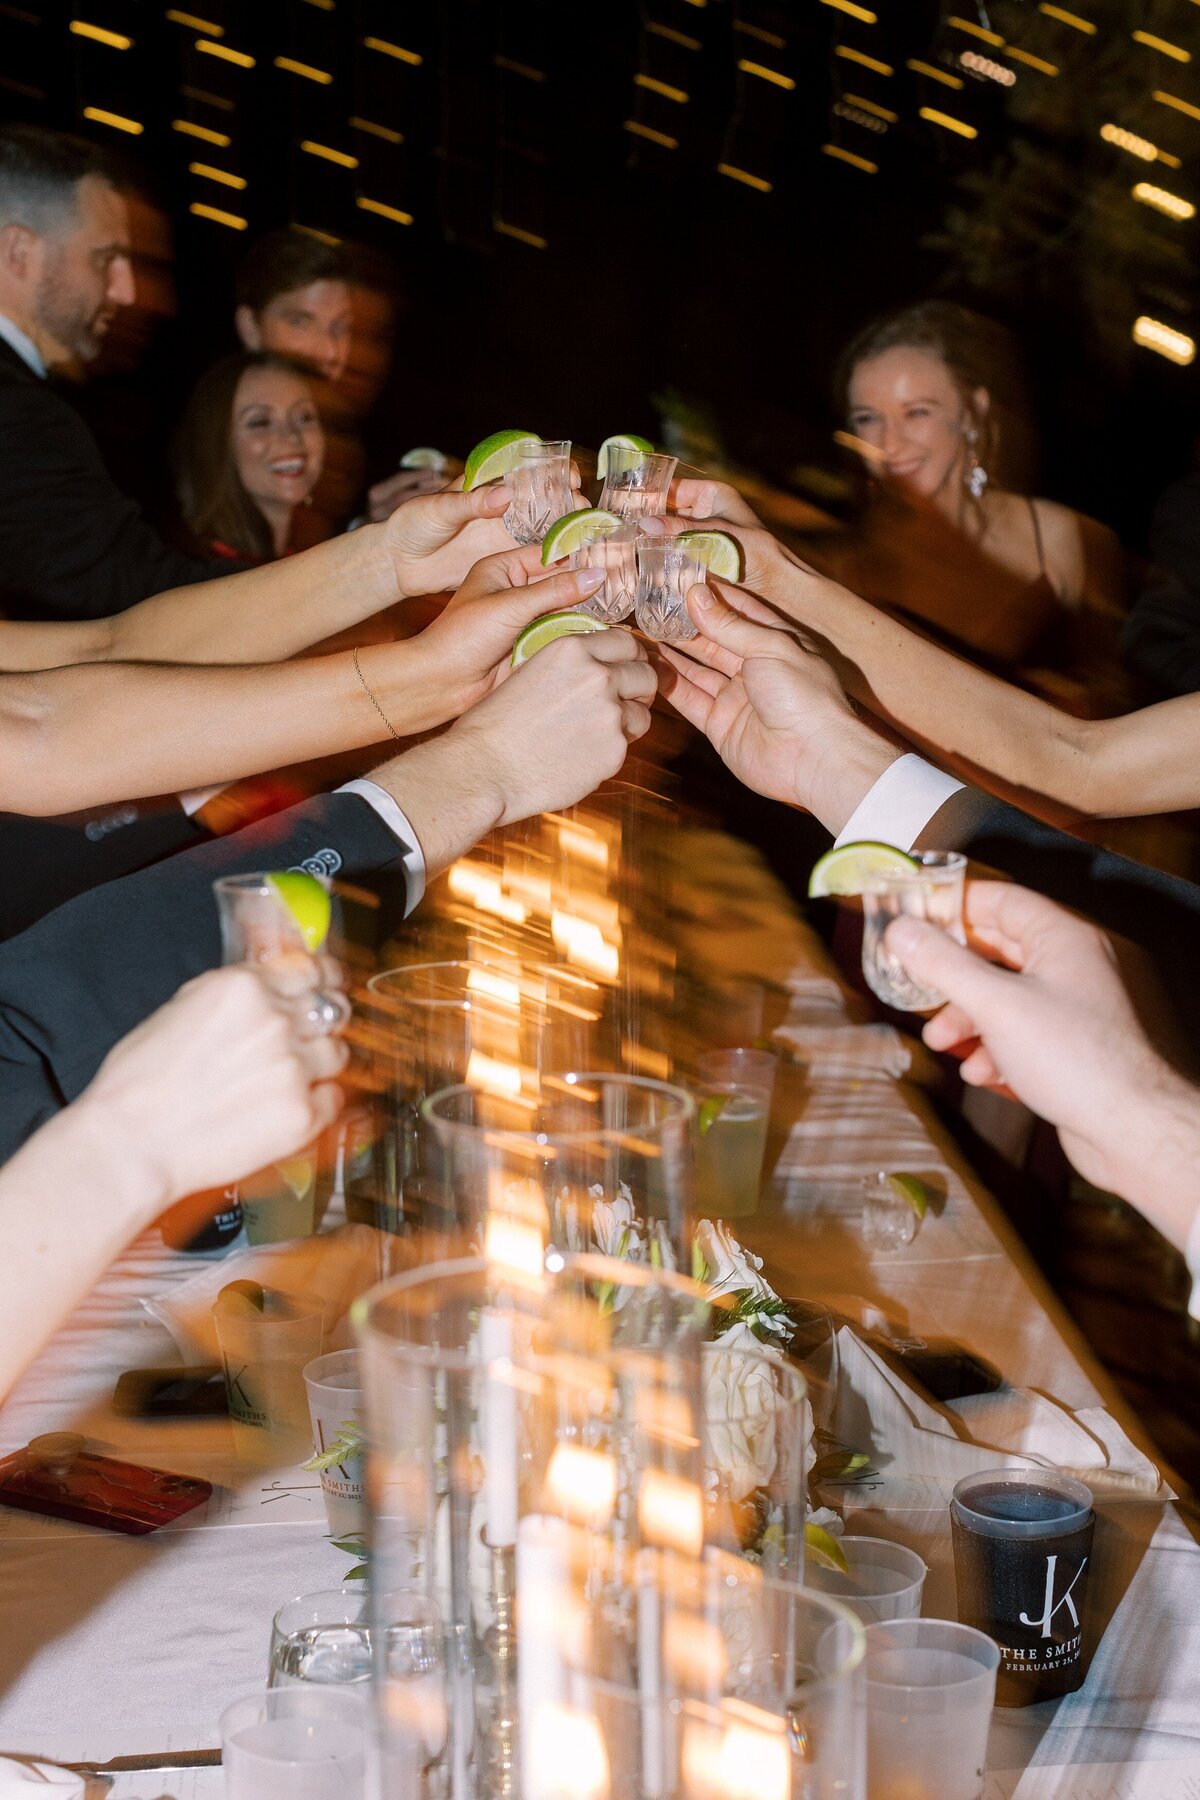 Guests clink glasses for a toast at a wedding reception